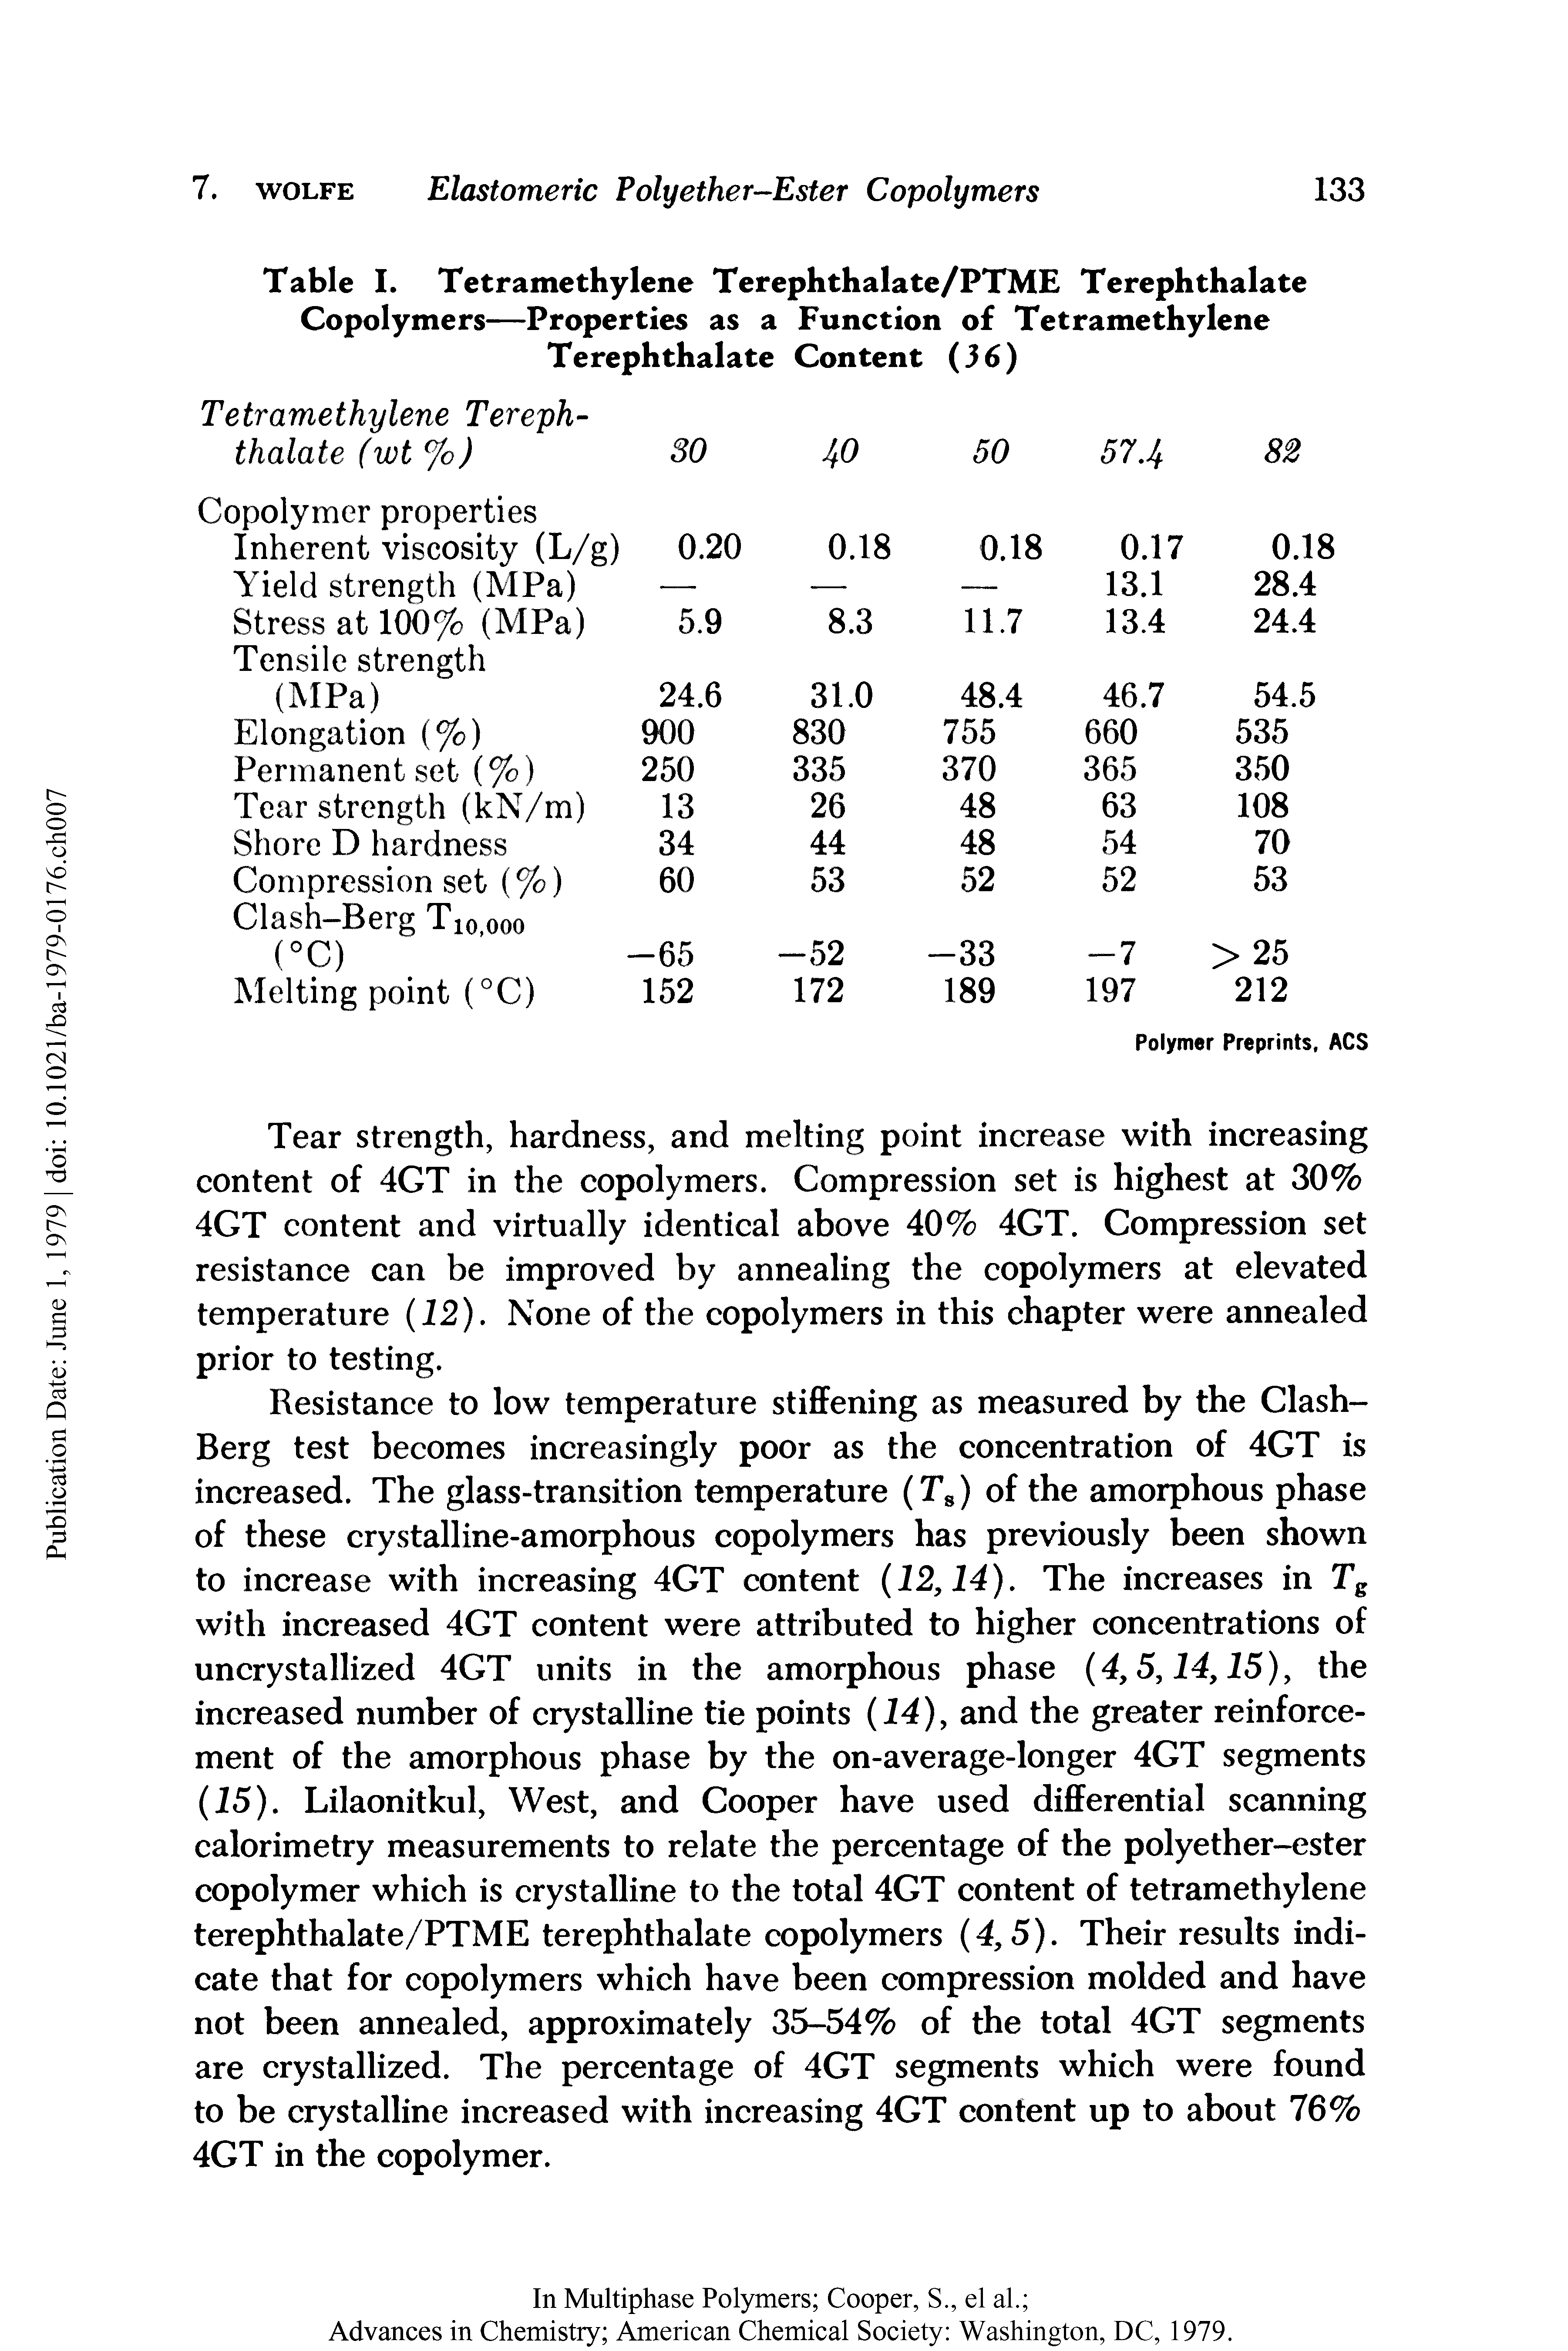 Table I. Tetramethylene Terephthalate/PTME Terephthalate Copolymers—Properties as a Function of Tetramethylene Terephthalate Content (36)...